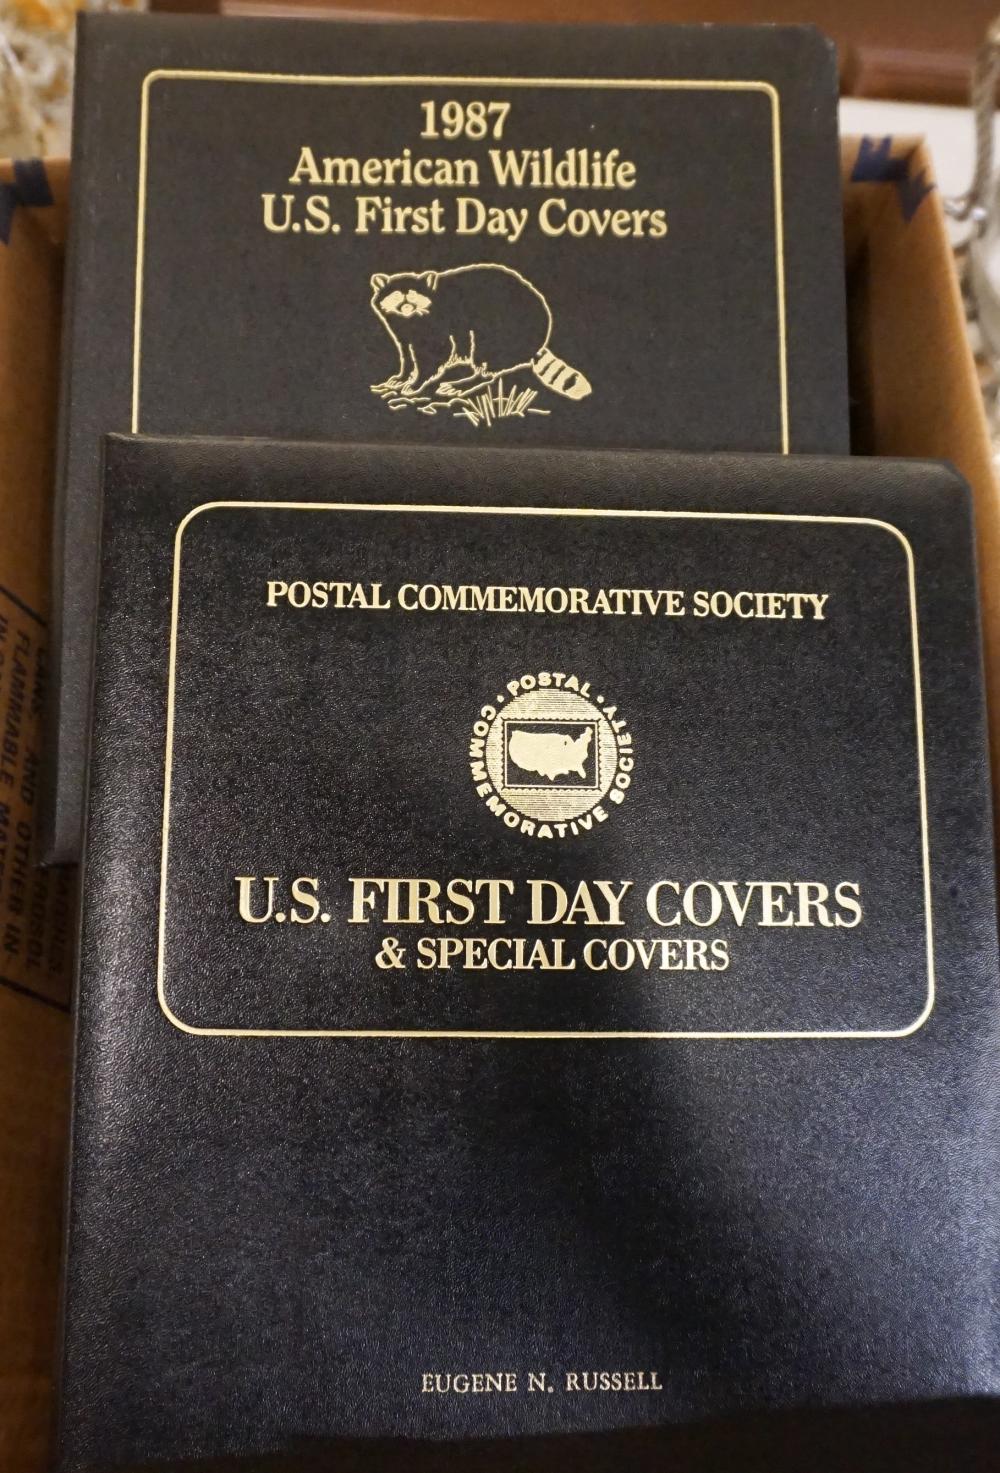 SEVEN VOLUMES OF U.S. FIRST DAY COVERSSeven